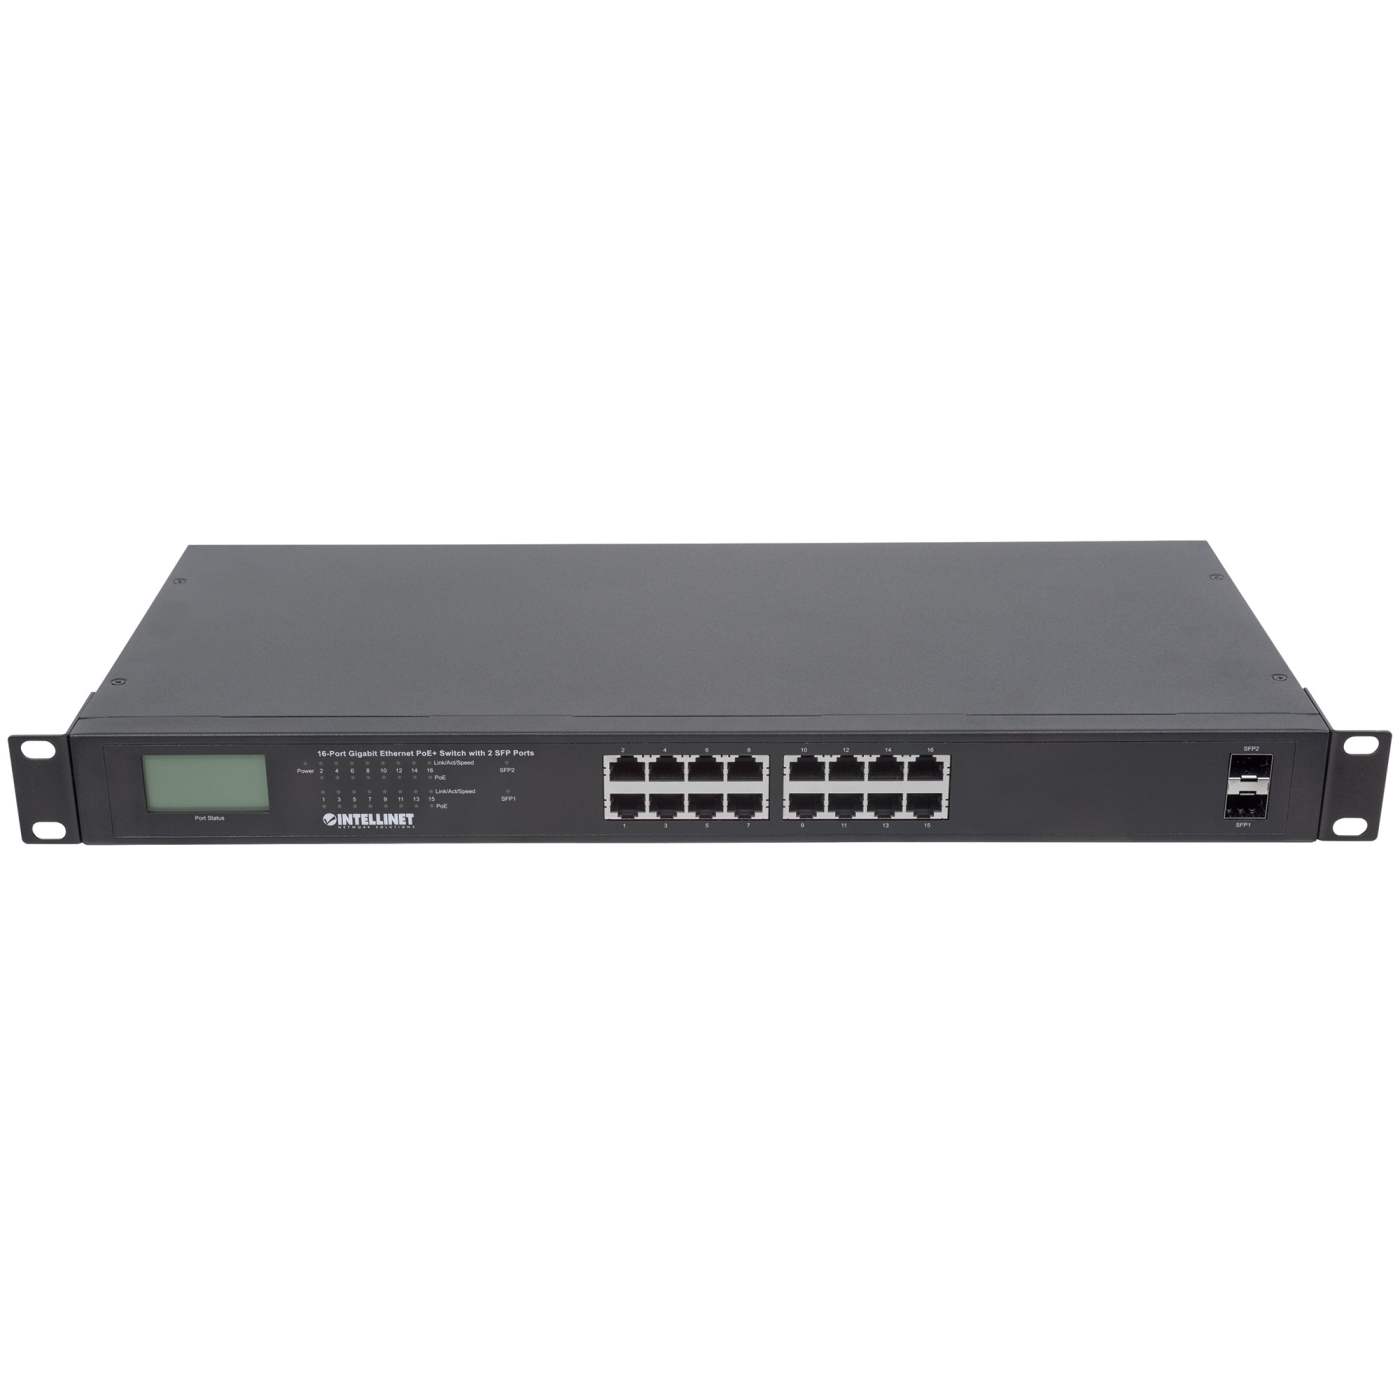 16-Port Gigabit Ethernet PoE+ Switch with 2 SFP Ports and LCD Screen Image 7